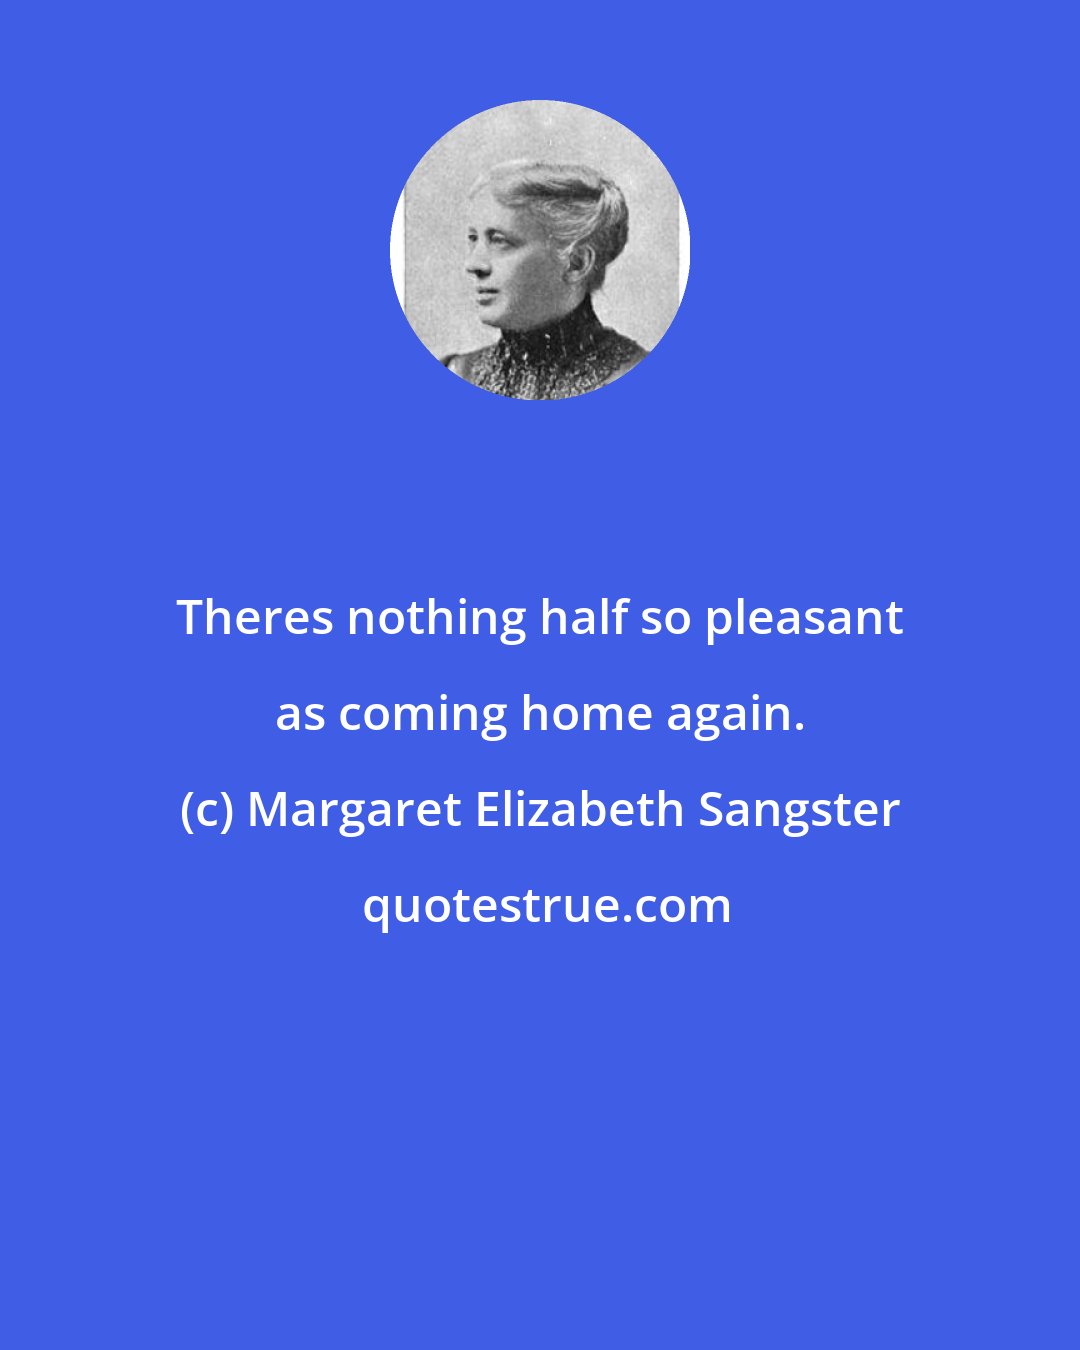 Margaret Elizabeth Sangster: Theres nothing half so pleasant as coming home again.